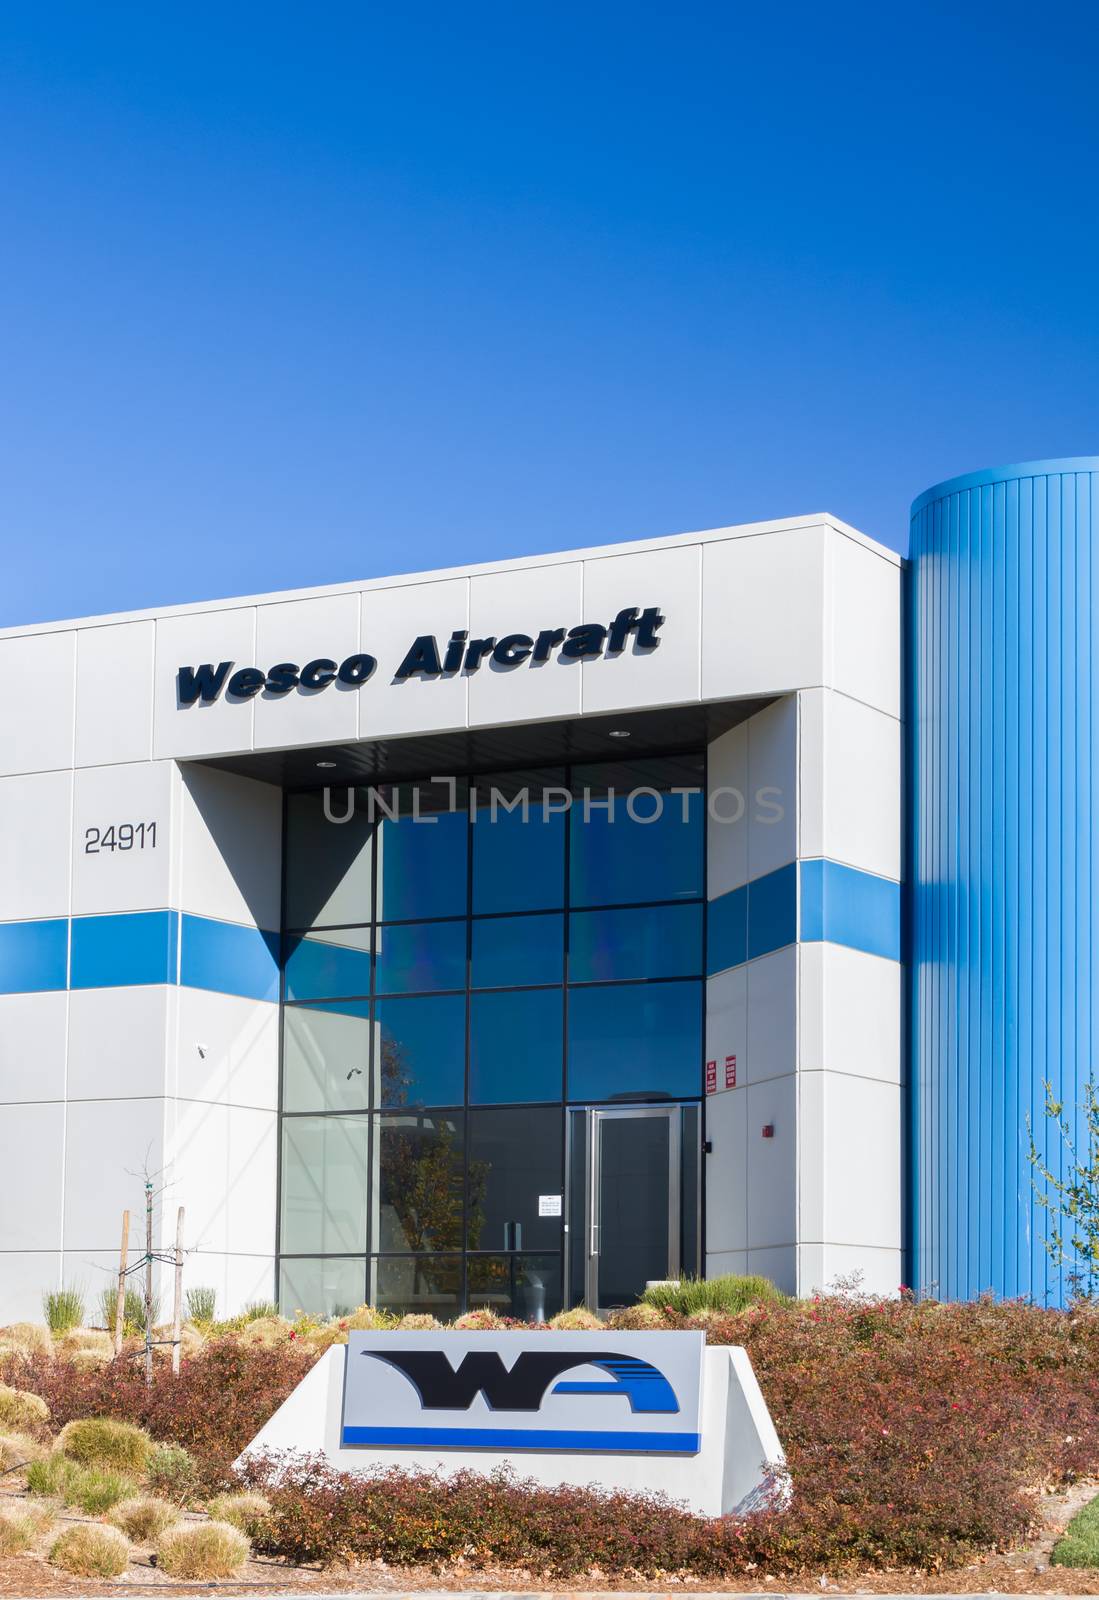 Wesco Aircraft Headquarters by wolterk